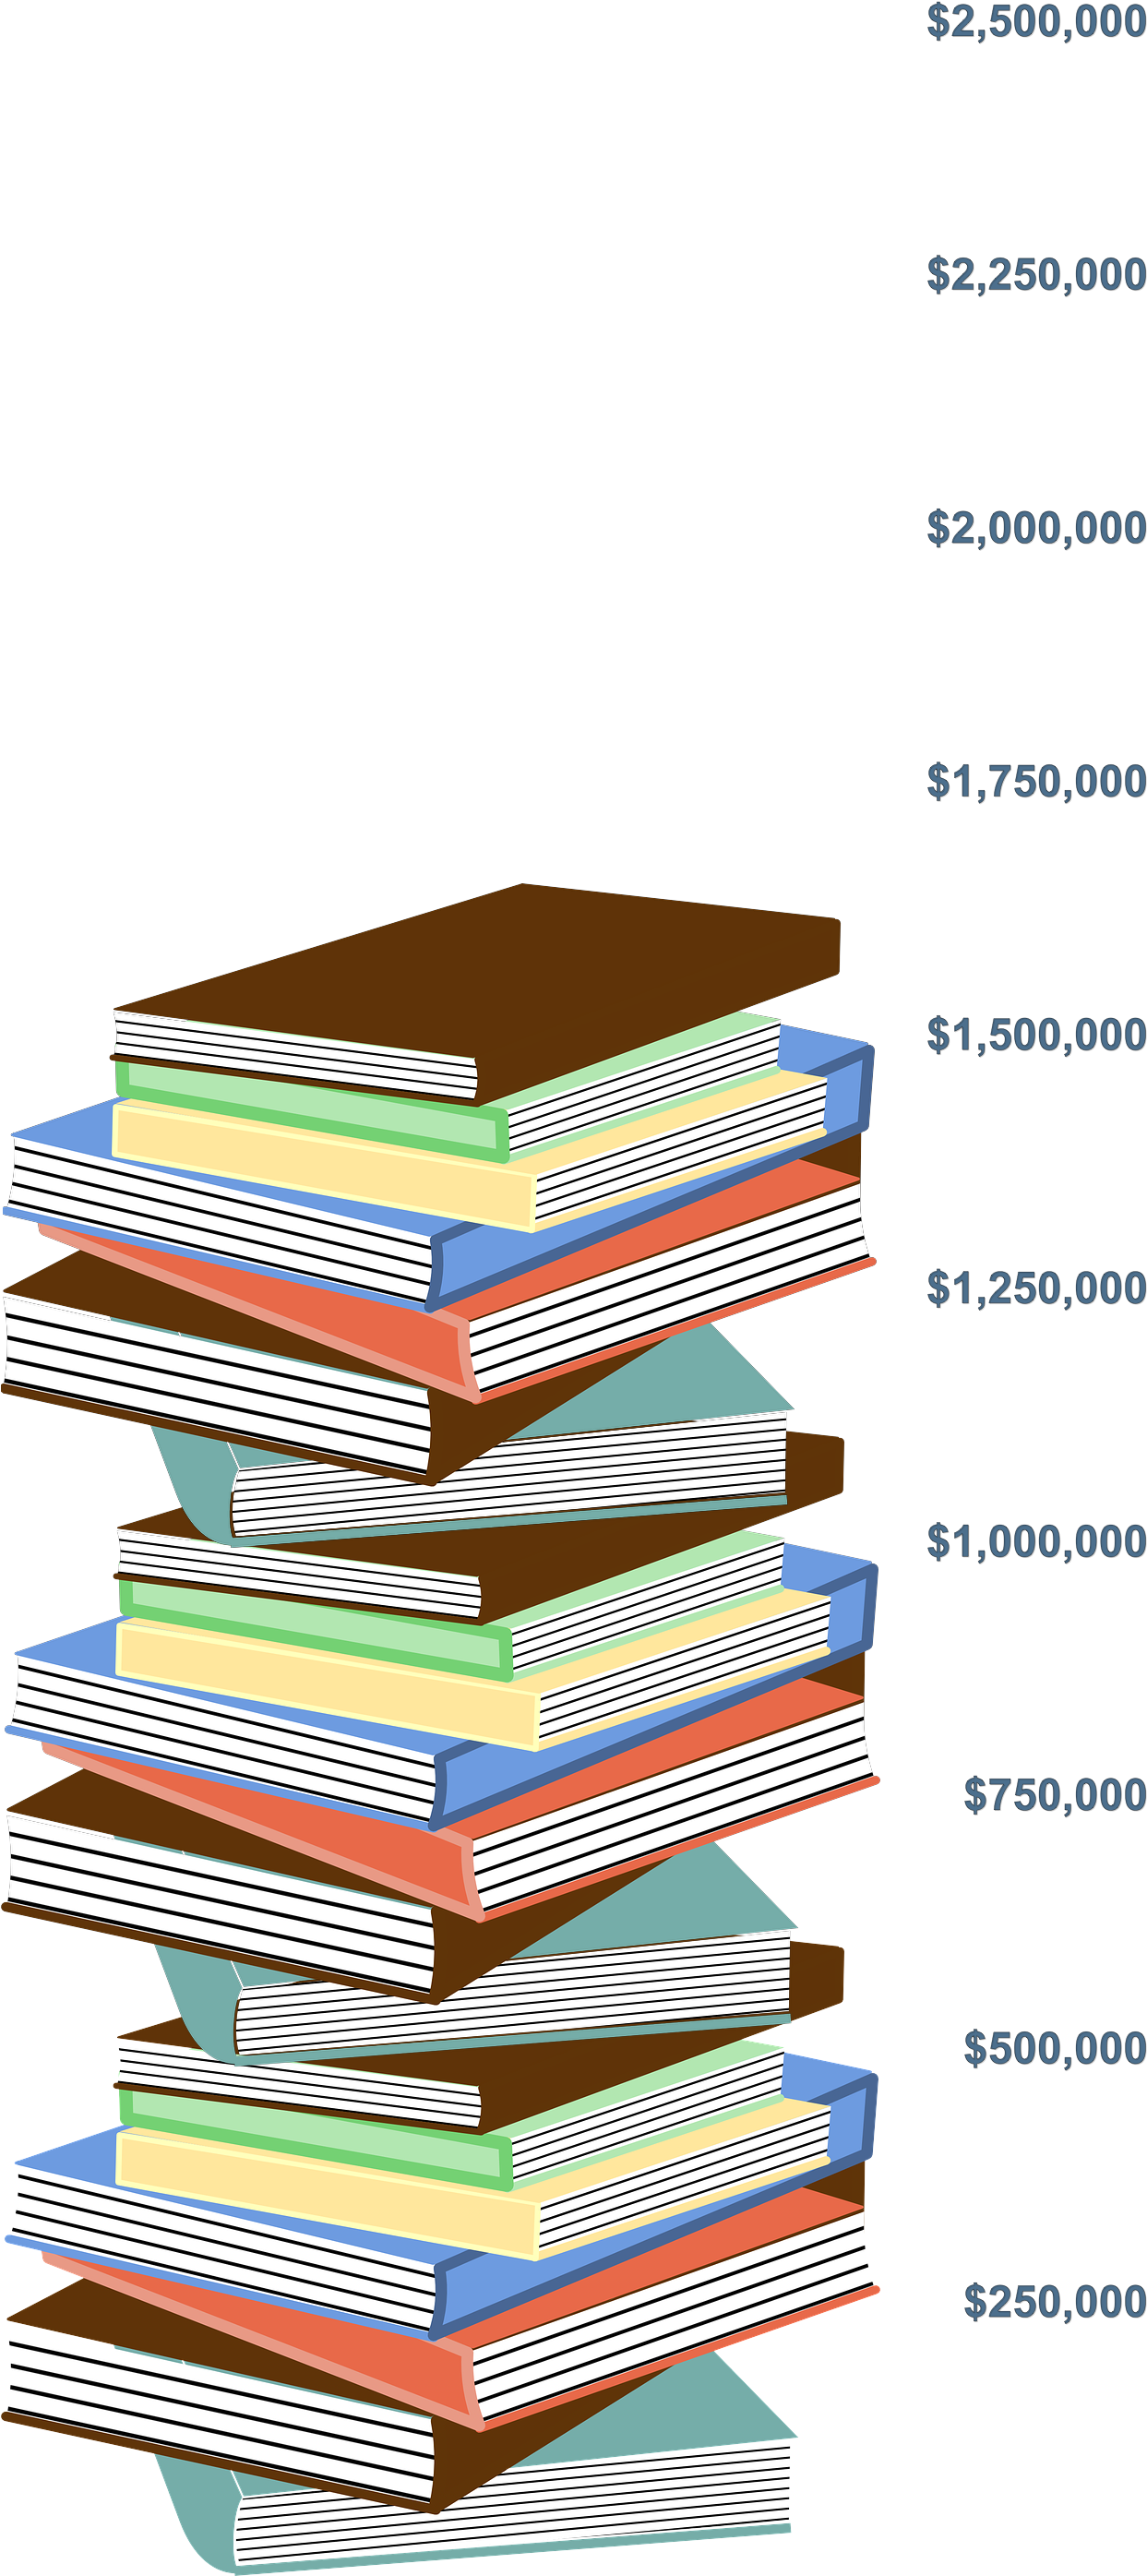 Join Now Book Stack Png